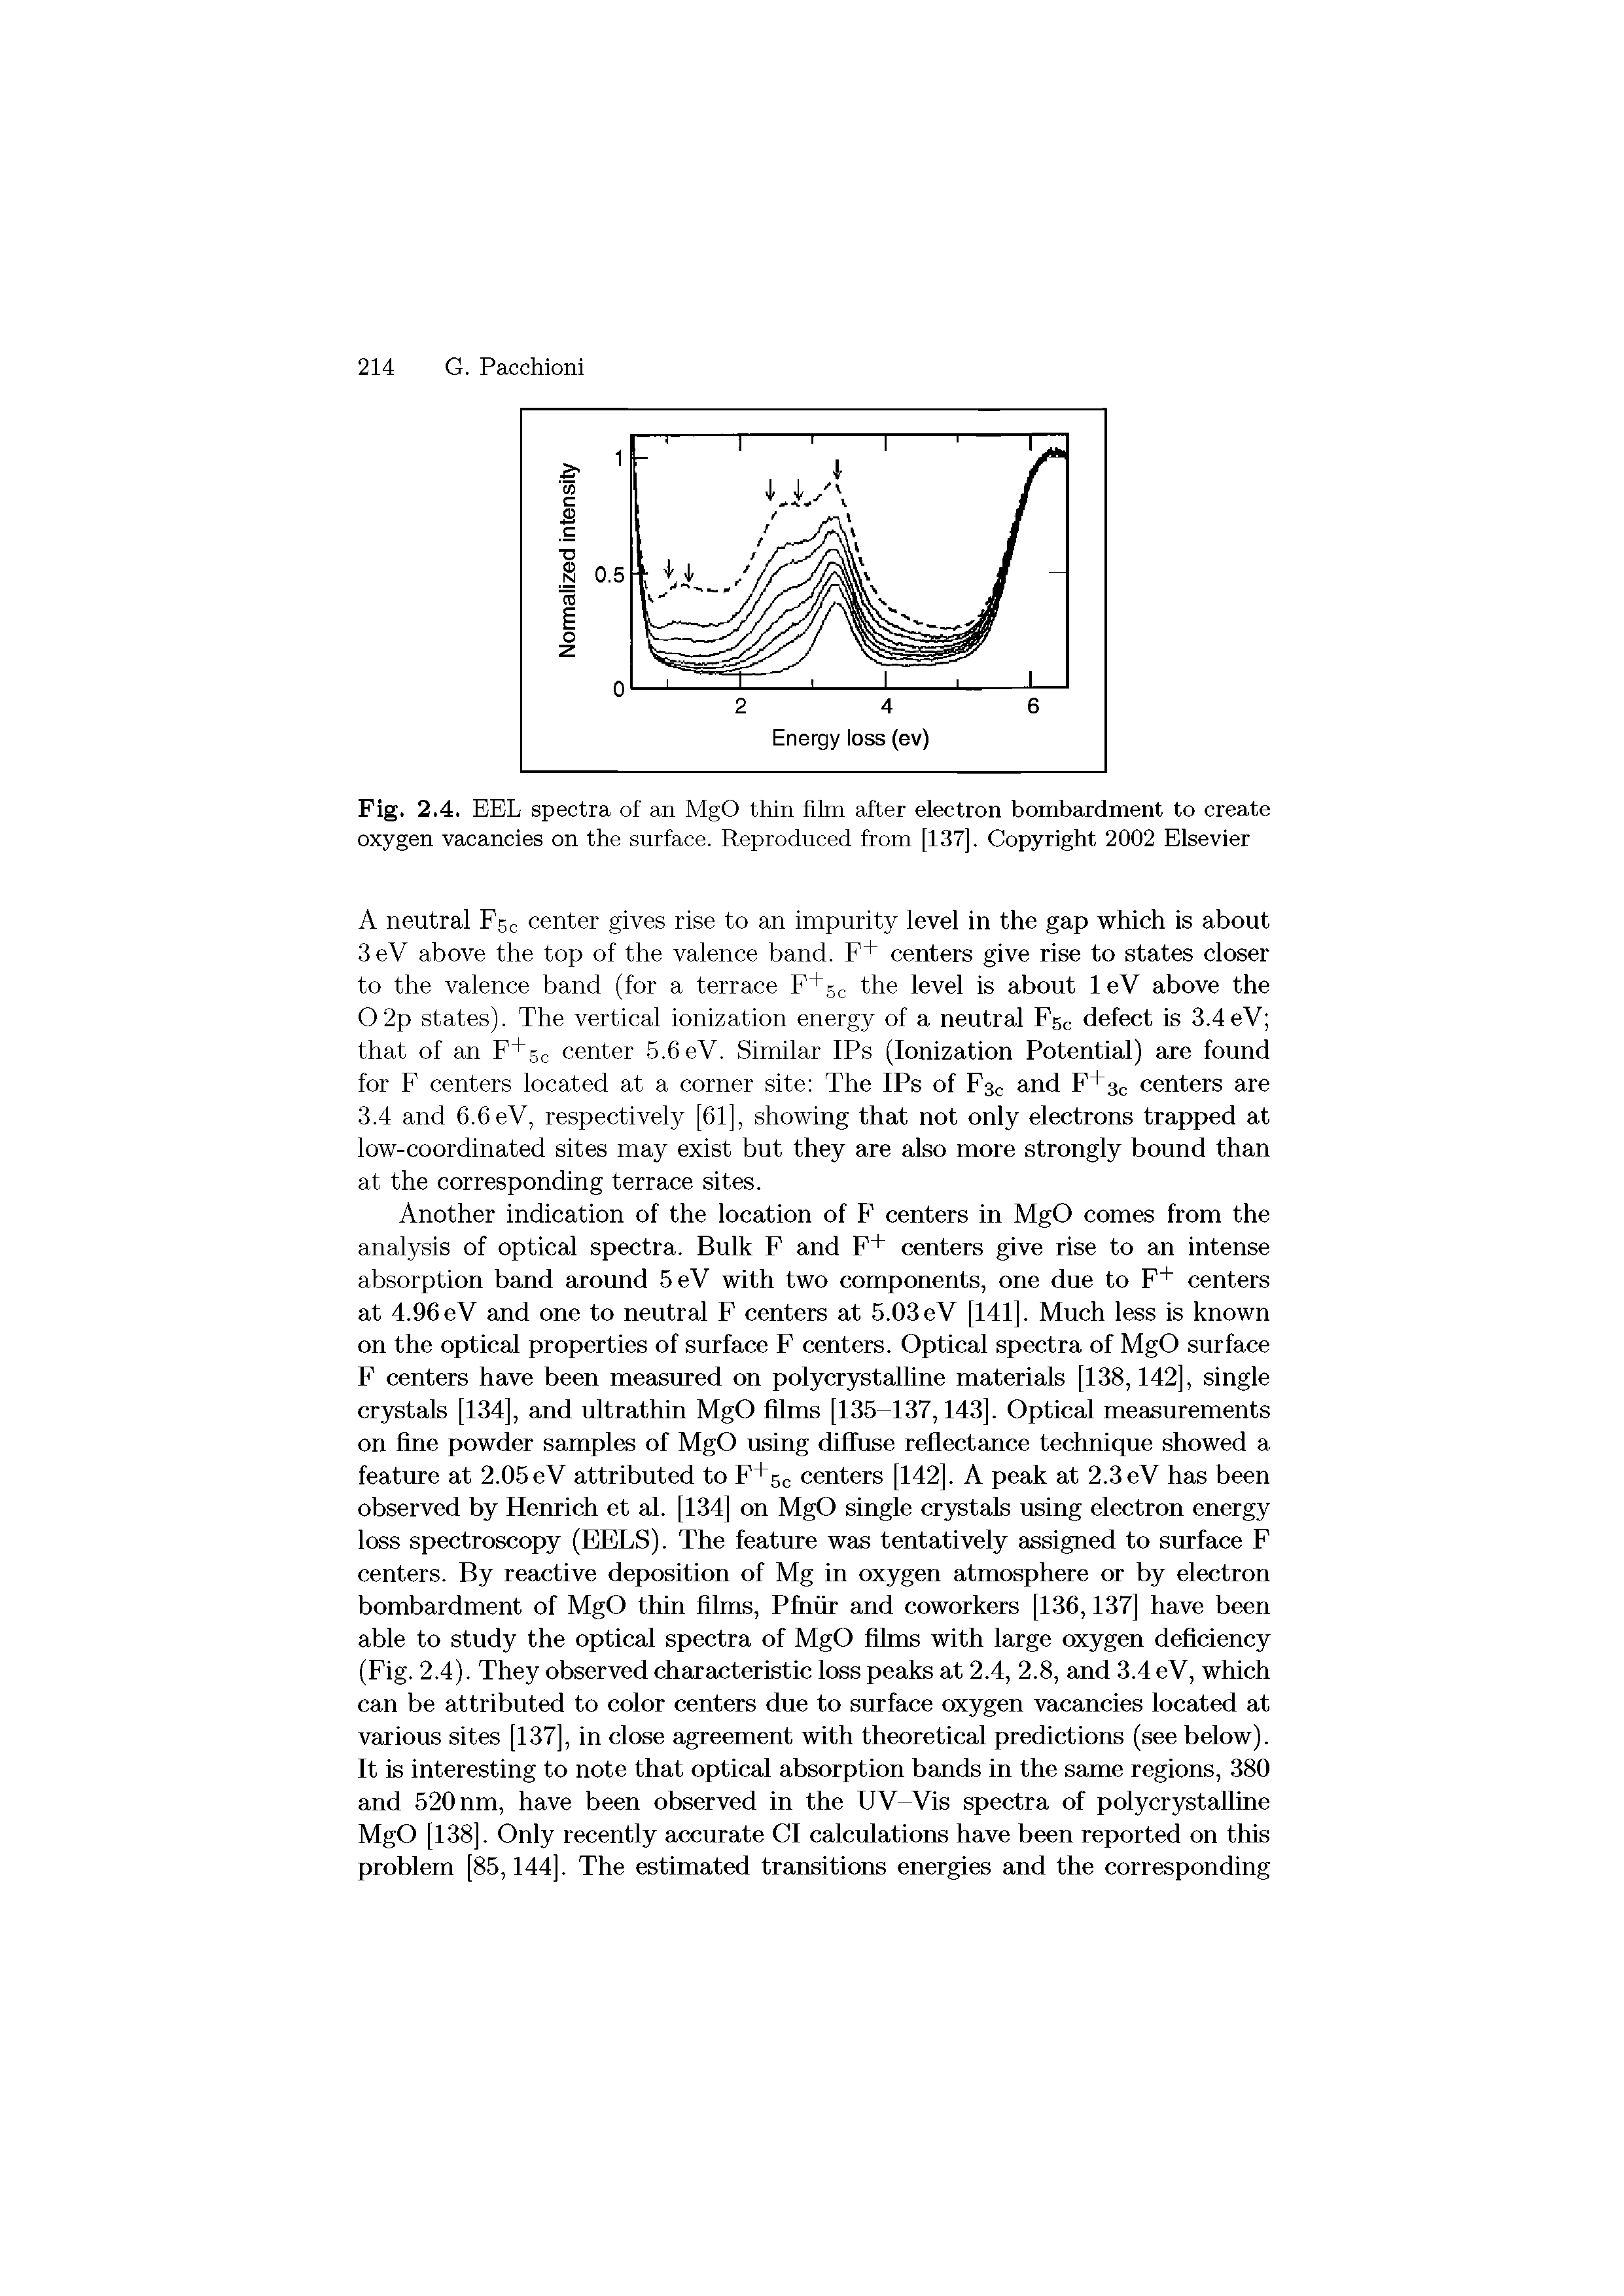 Fig. 2.4. EEL spectra of an MgO thin film after electron bombardment to create oxygen vacancies on the surface. Reproduced from [137], Copyright 2002 Elsevier...